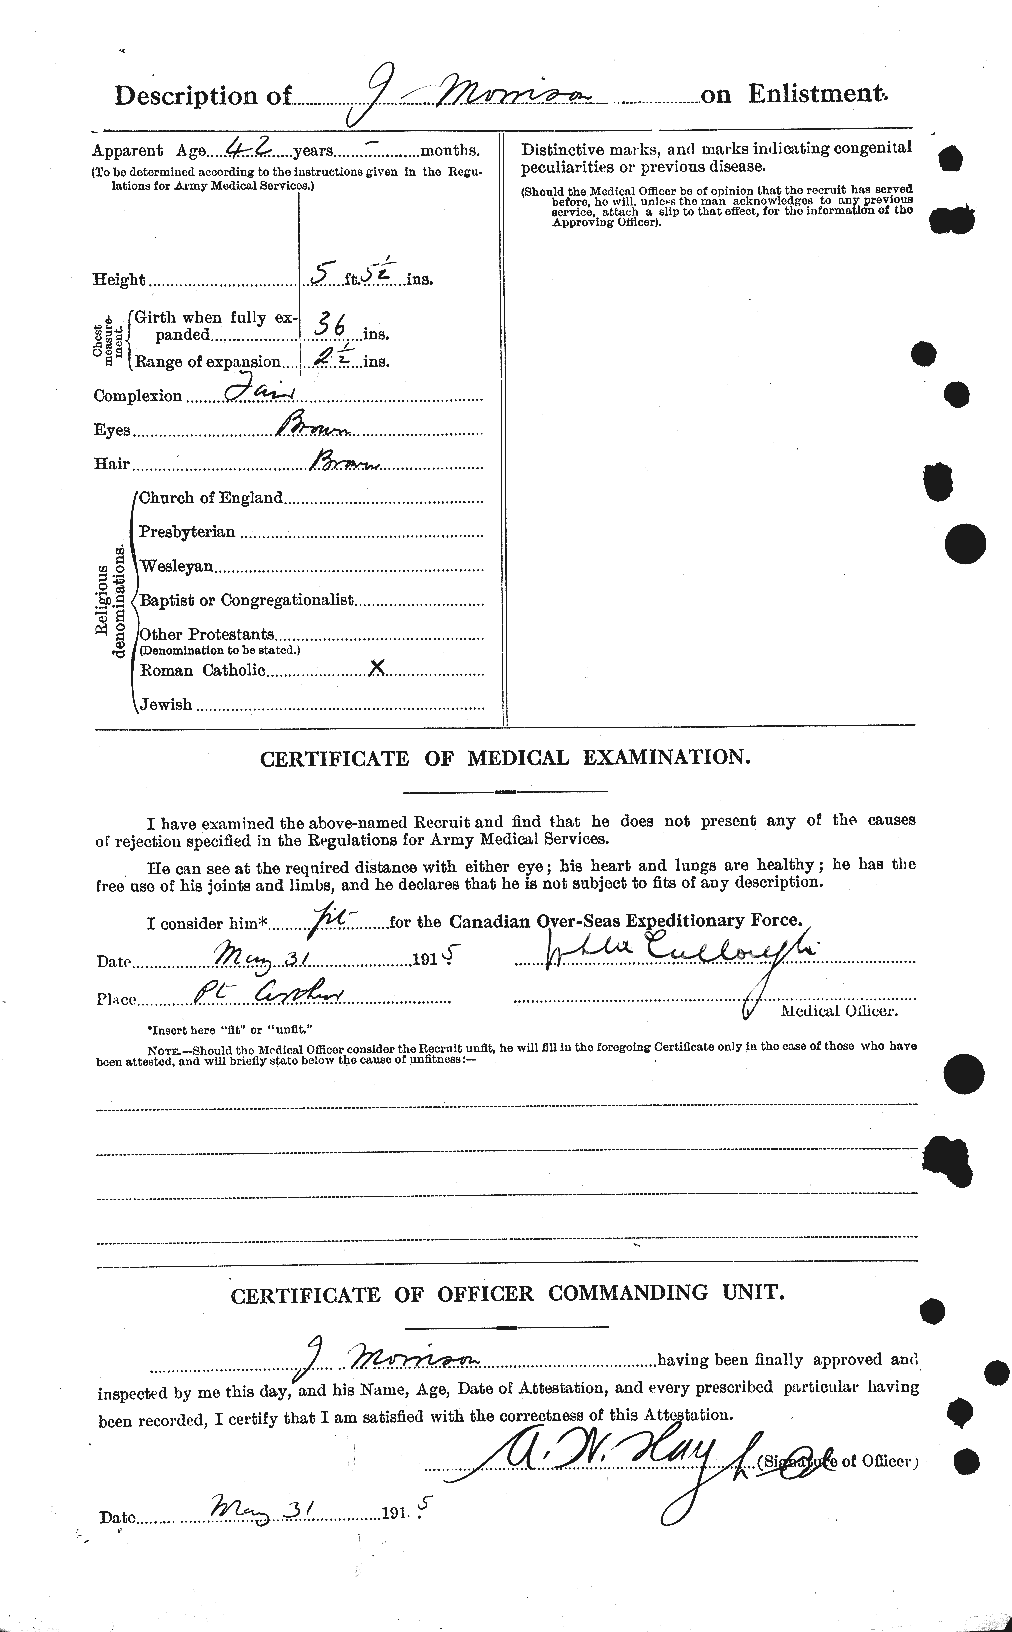 Personnel Records of the First World War - CEF 506905b